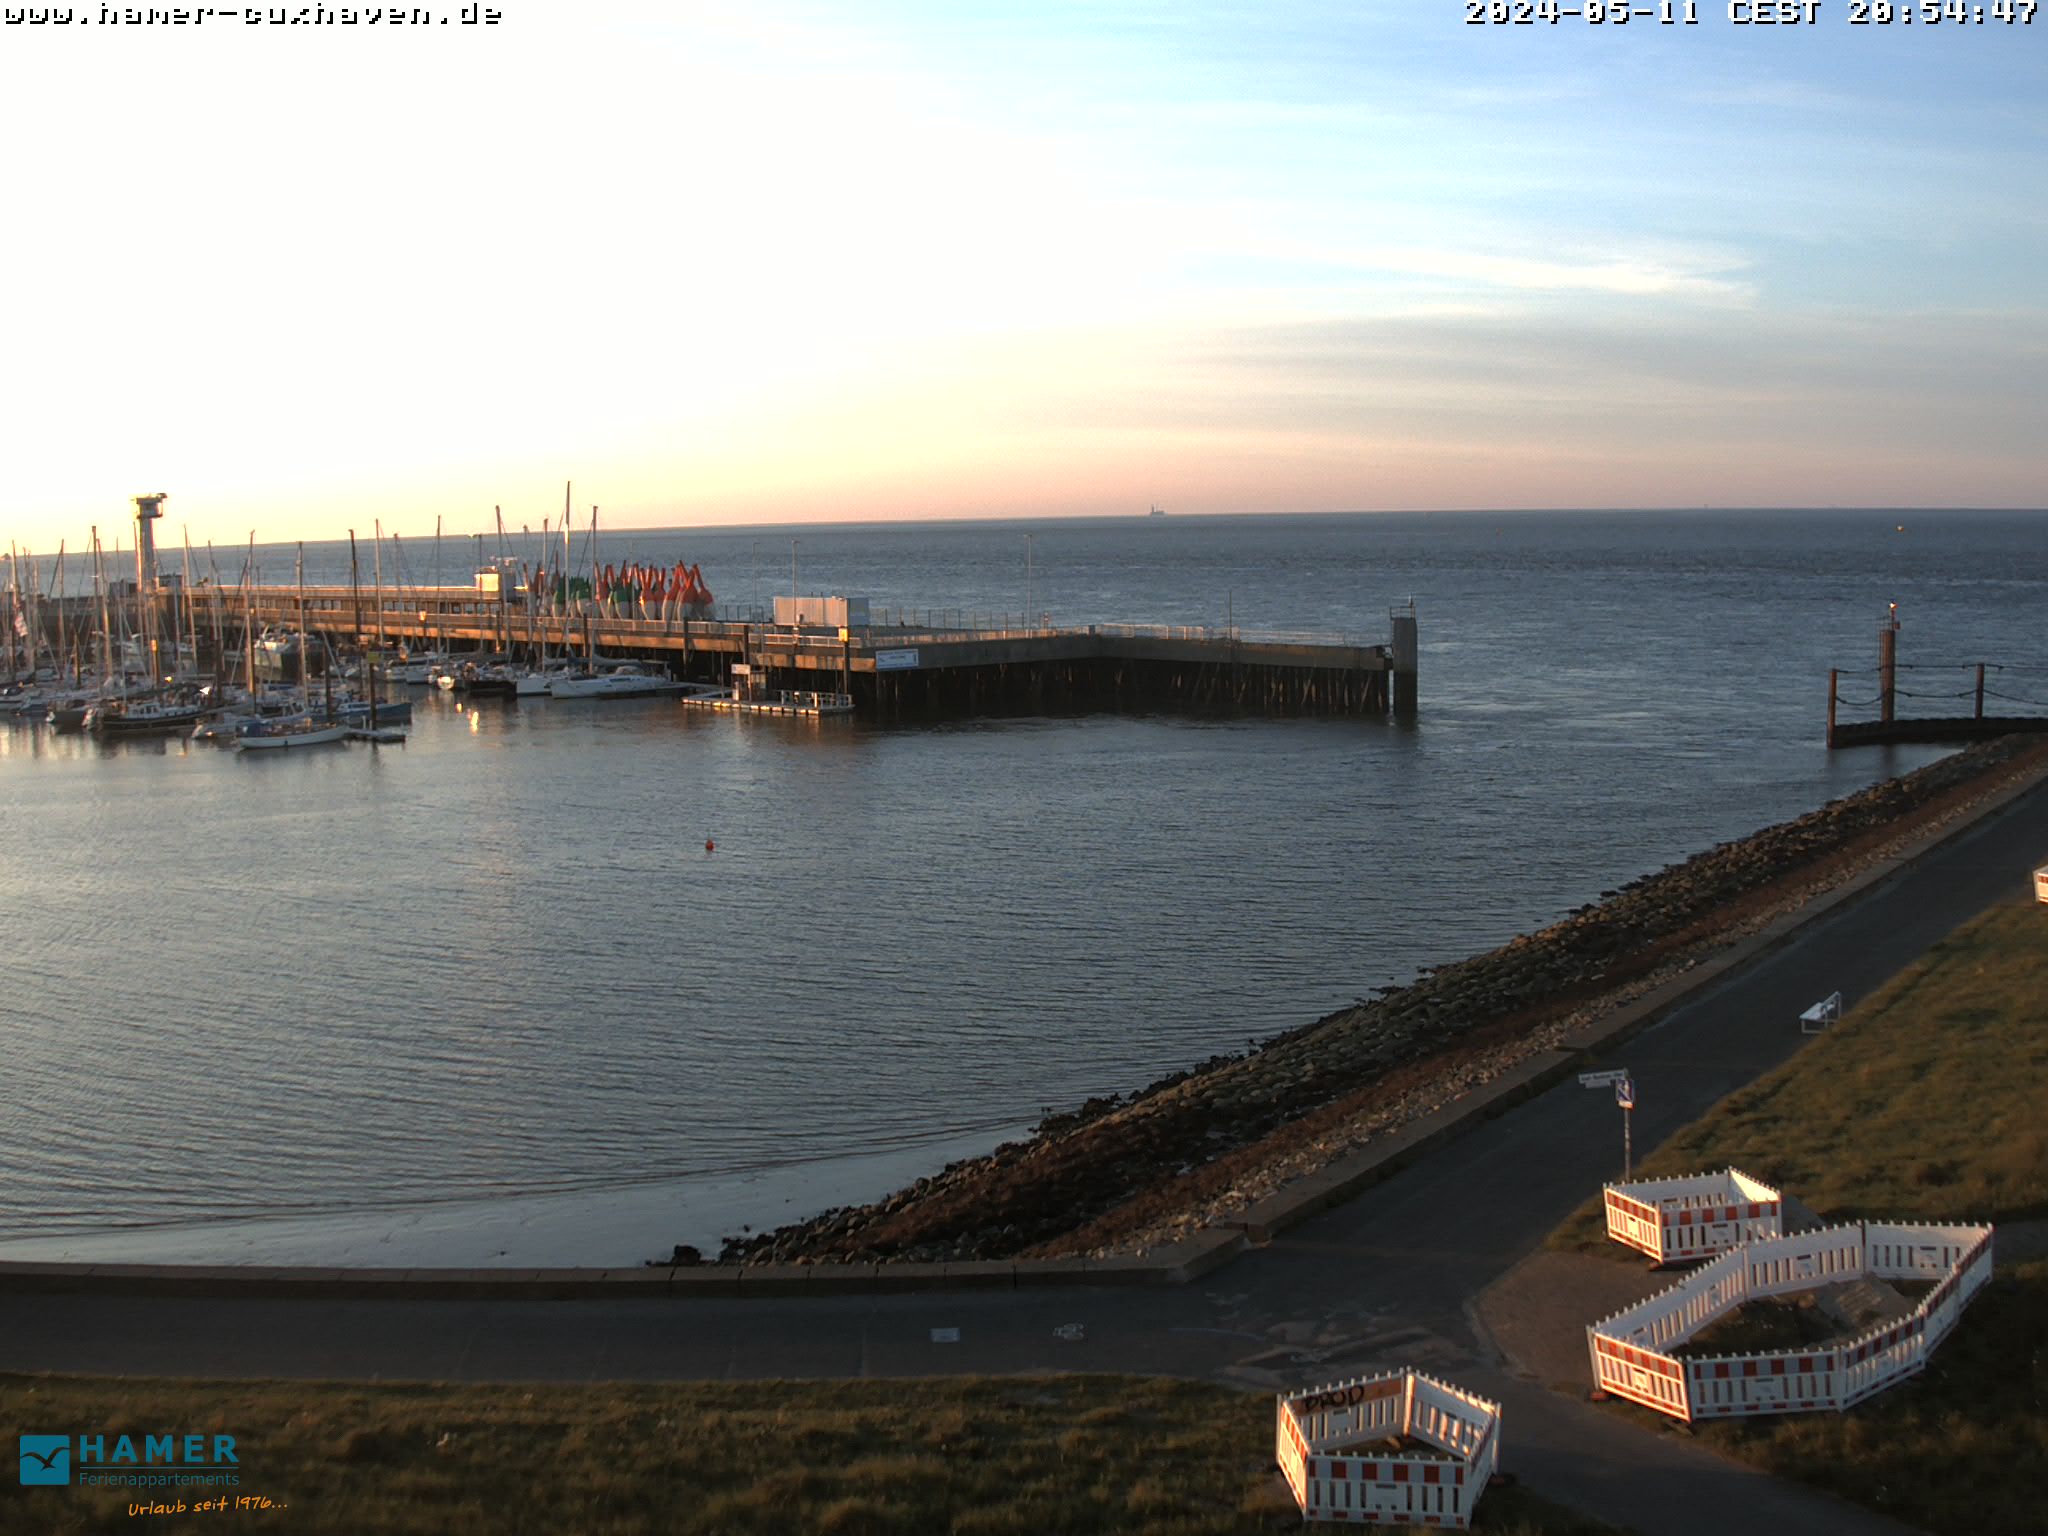 Cuxhaven Ons. 20:55